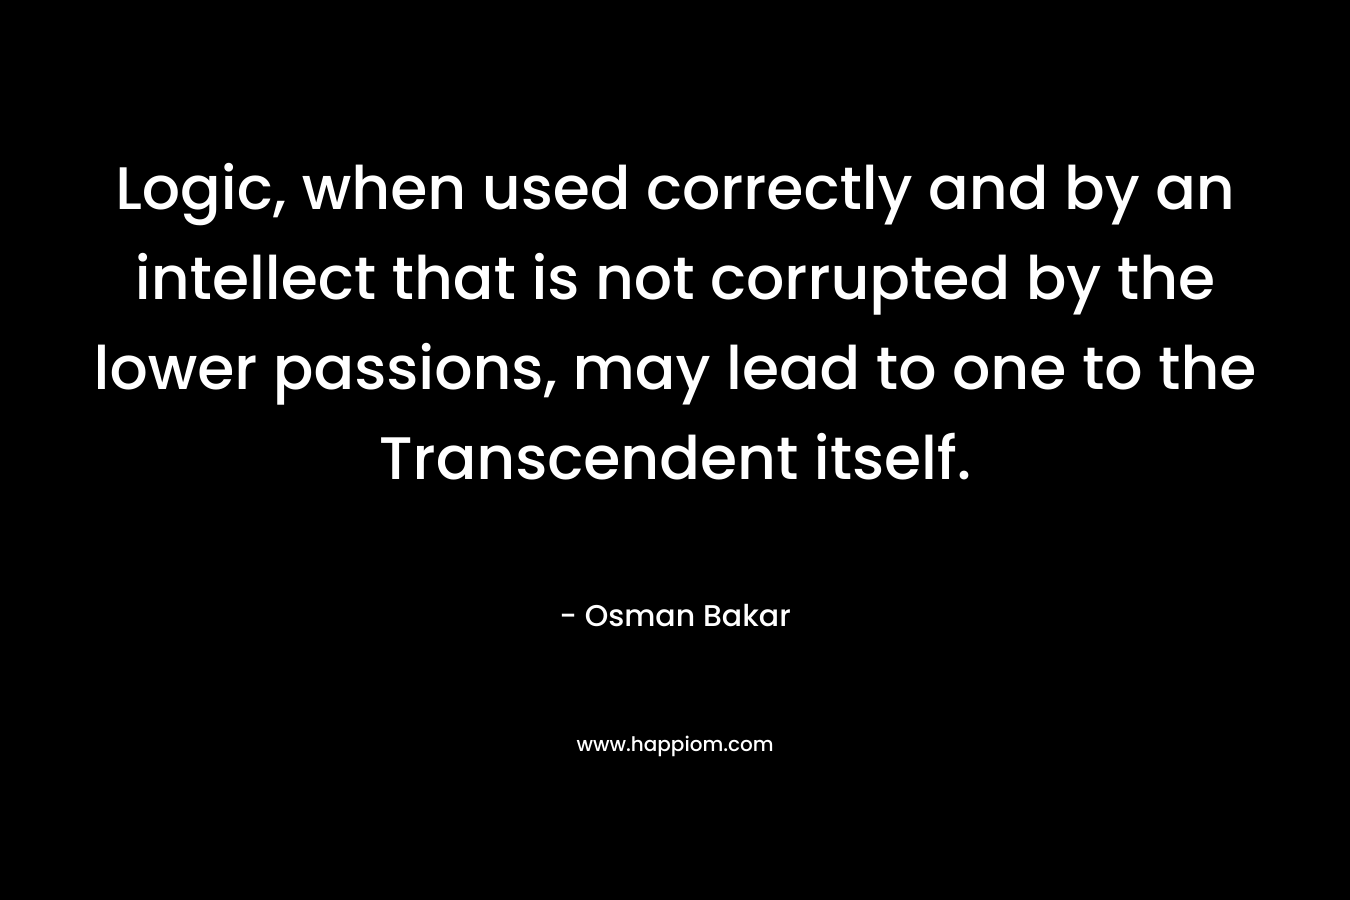 Logic, when used correctly and by an intellect that is not corrupted by the lower passions, may lead to one to the Transcendent itself. – Osman Bakar